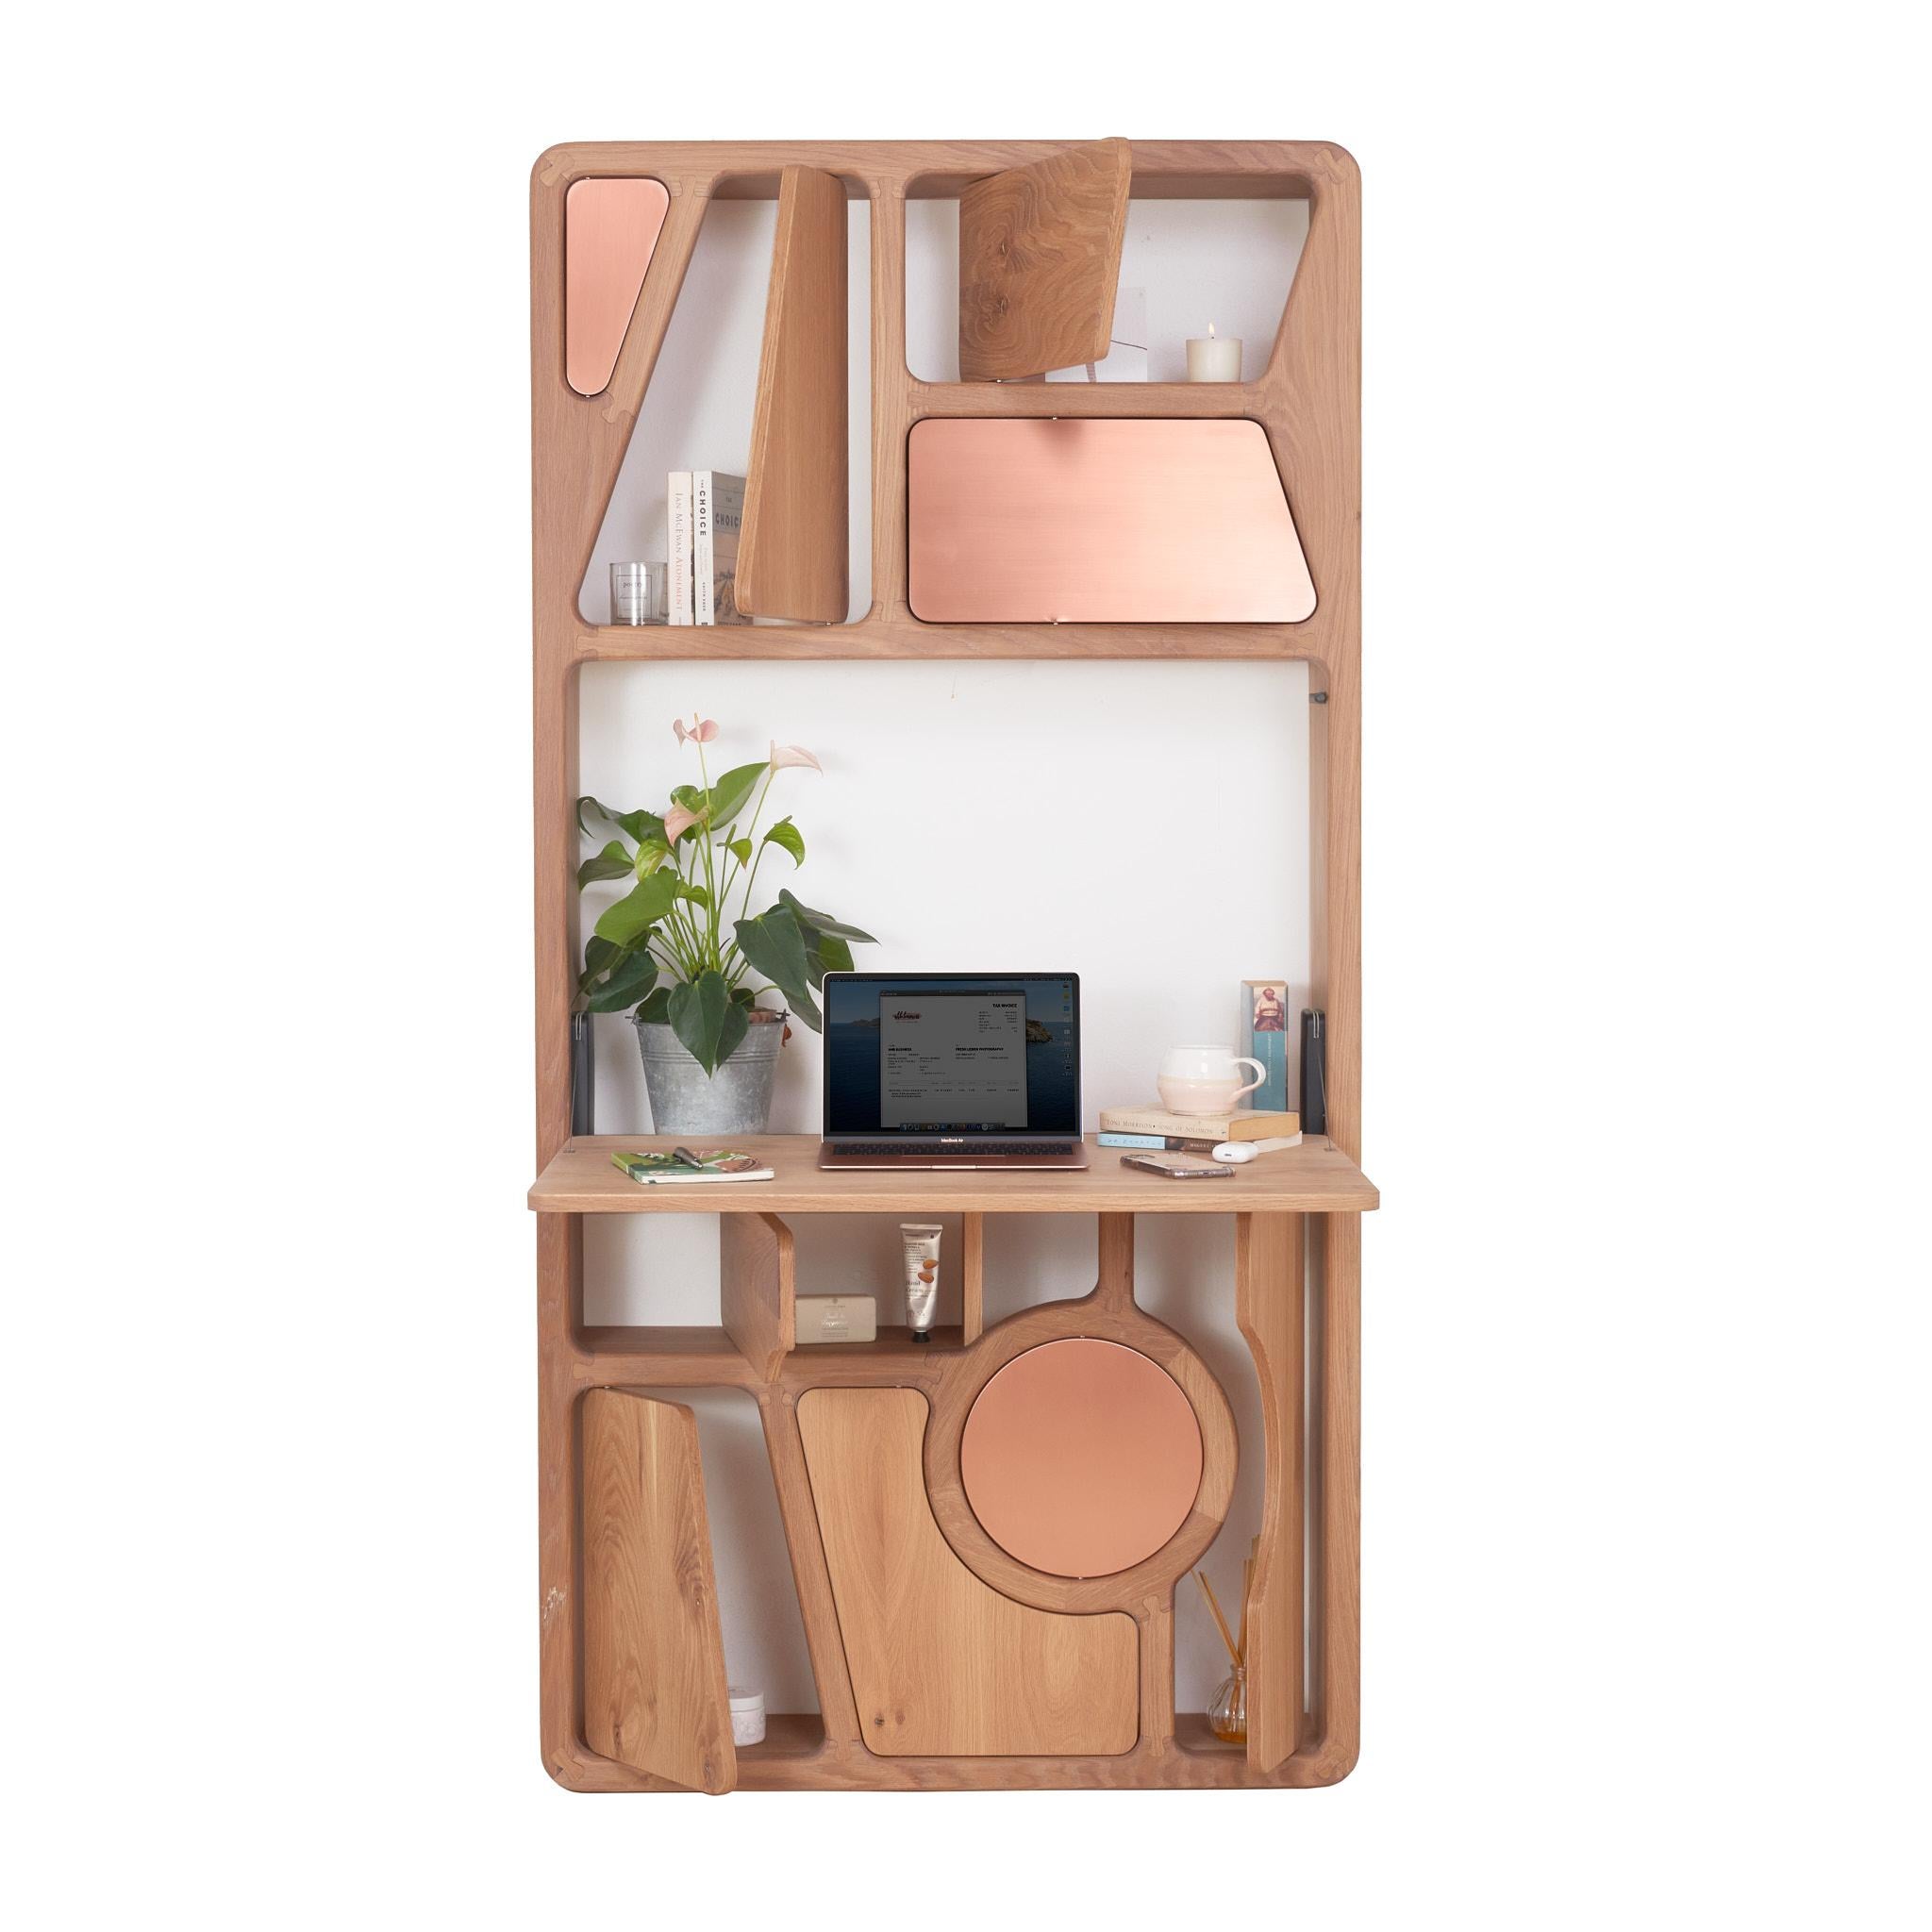 The Wall Office is the epitome of space saving solutions. A unique, handcrafted, fine-furniture item, it takes up only 0.25m^2 of floor space (or 2.6ft^2) 

It is carefully constructed from a mixture of solid wood, soft metals (brass and copper) and